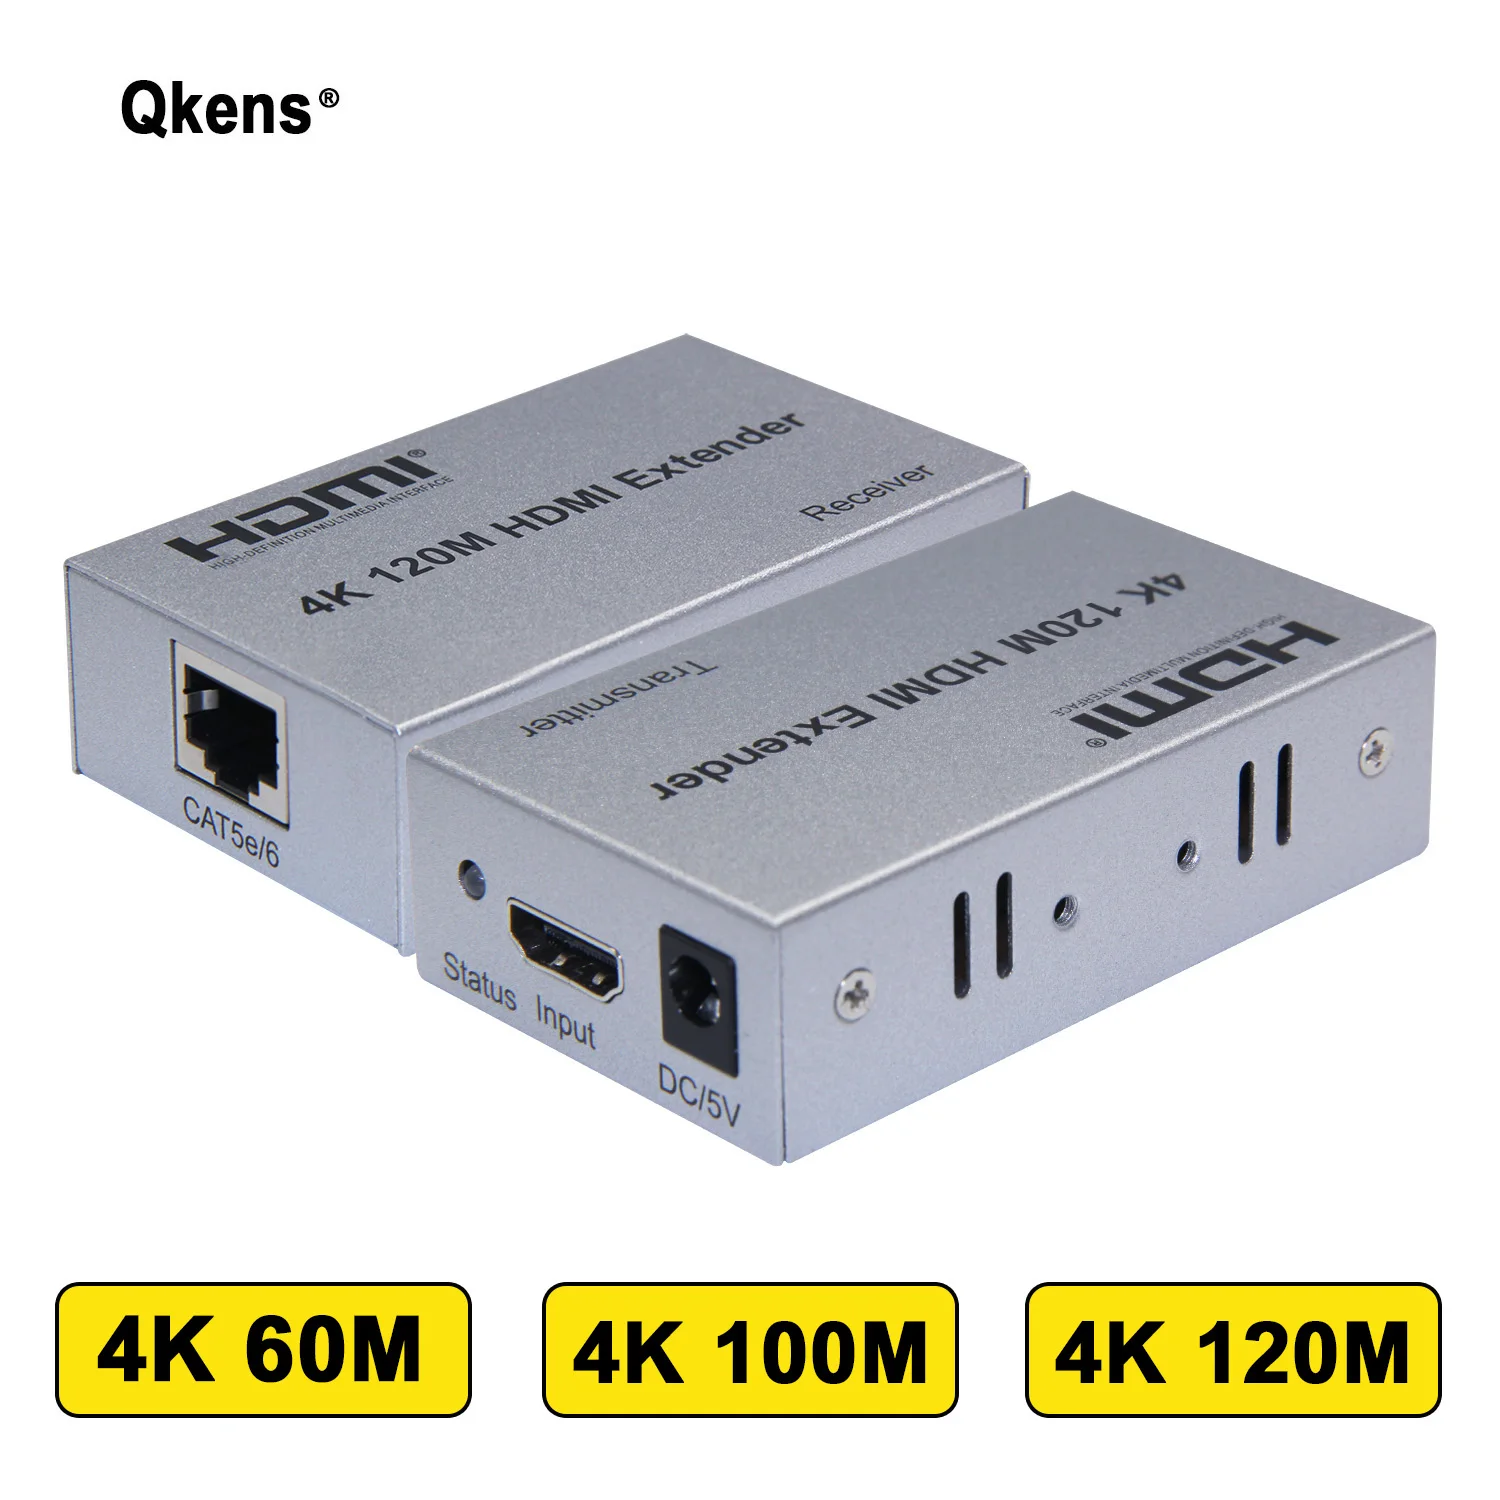 

4K 60M 100M 120M HDMI Extender To RJ45 Cat5e Cat6 Cable Audio Video Converter HDMI Ethernet Transmitter Receiver for PS4 PC TV